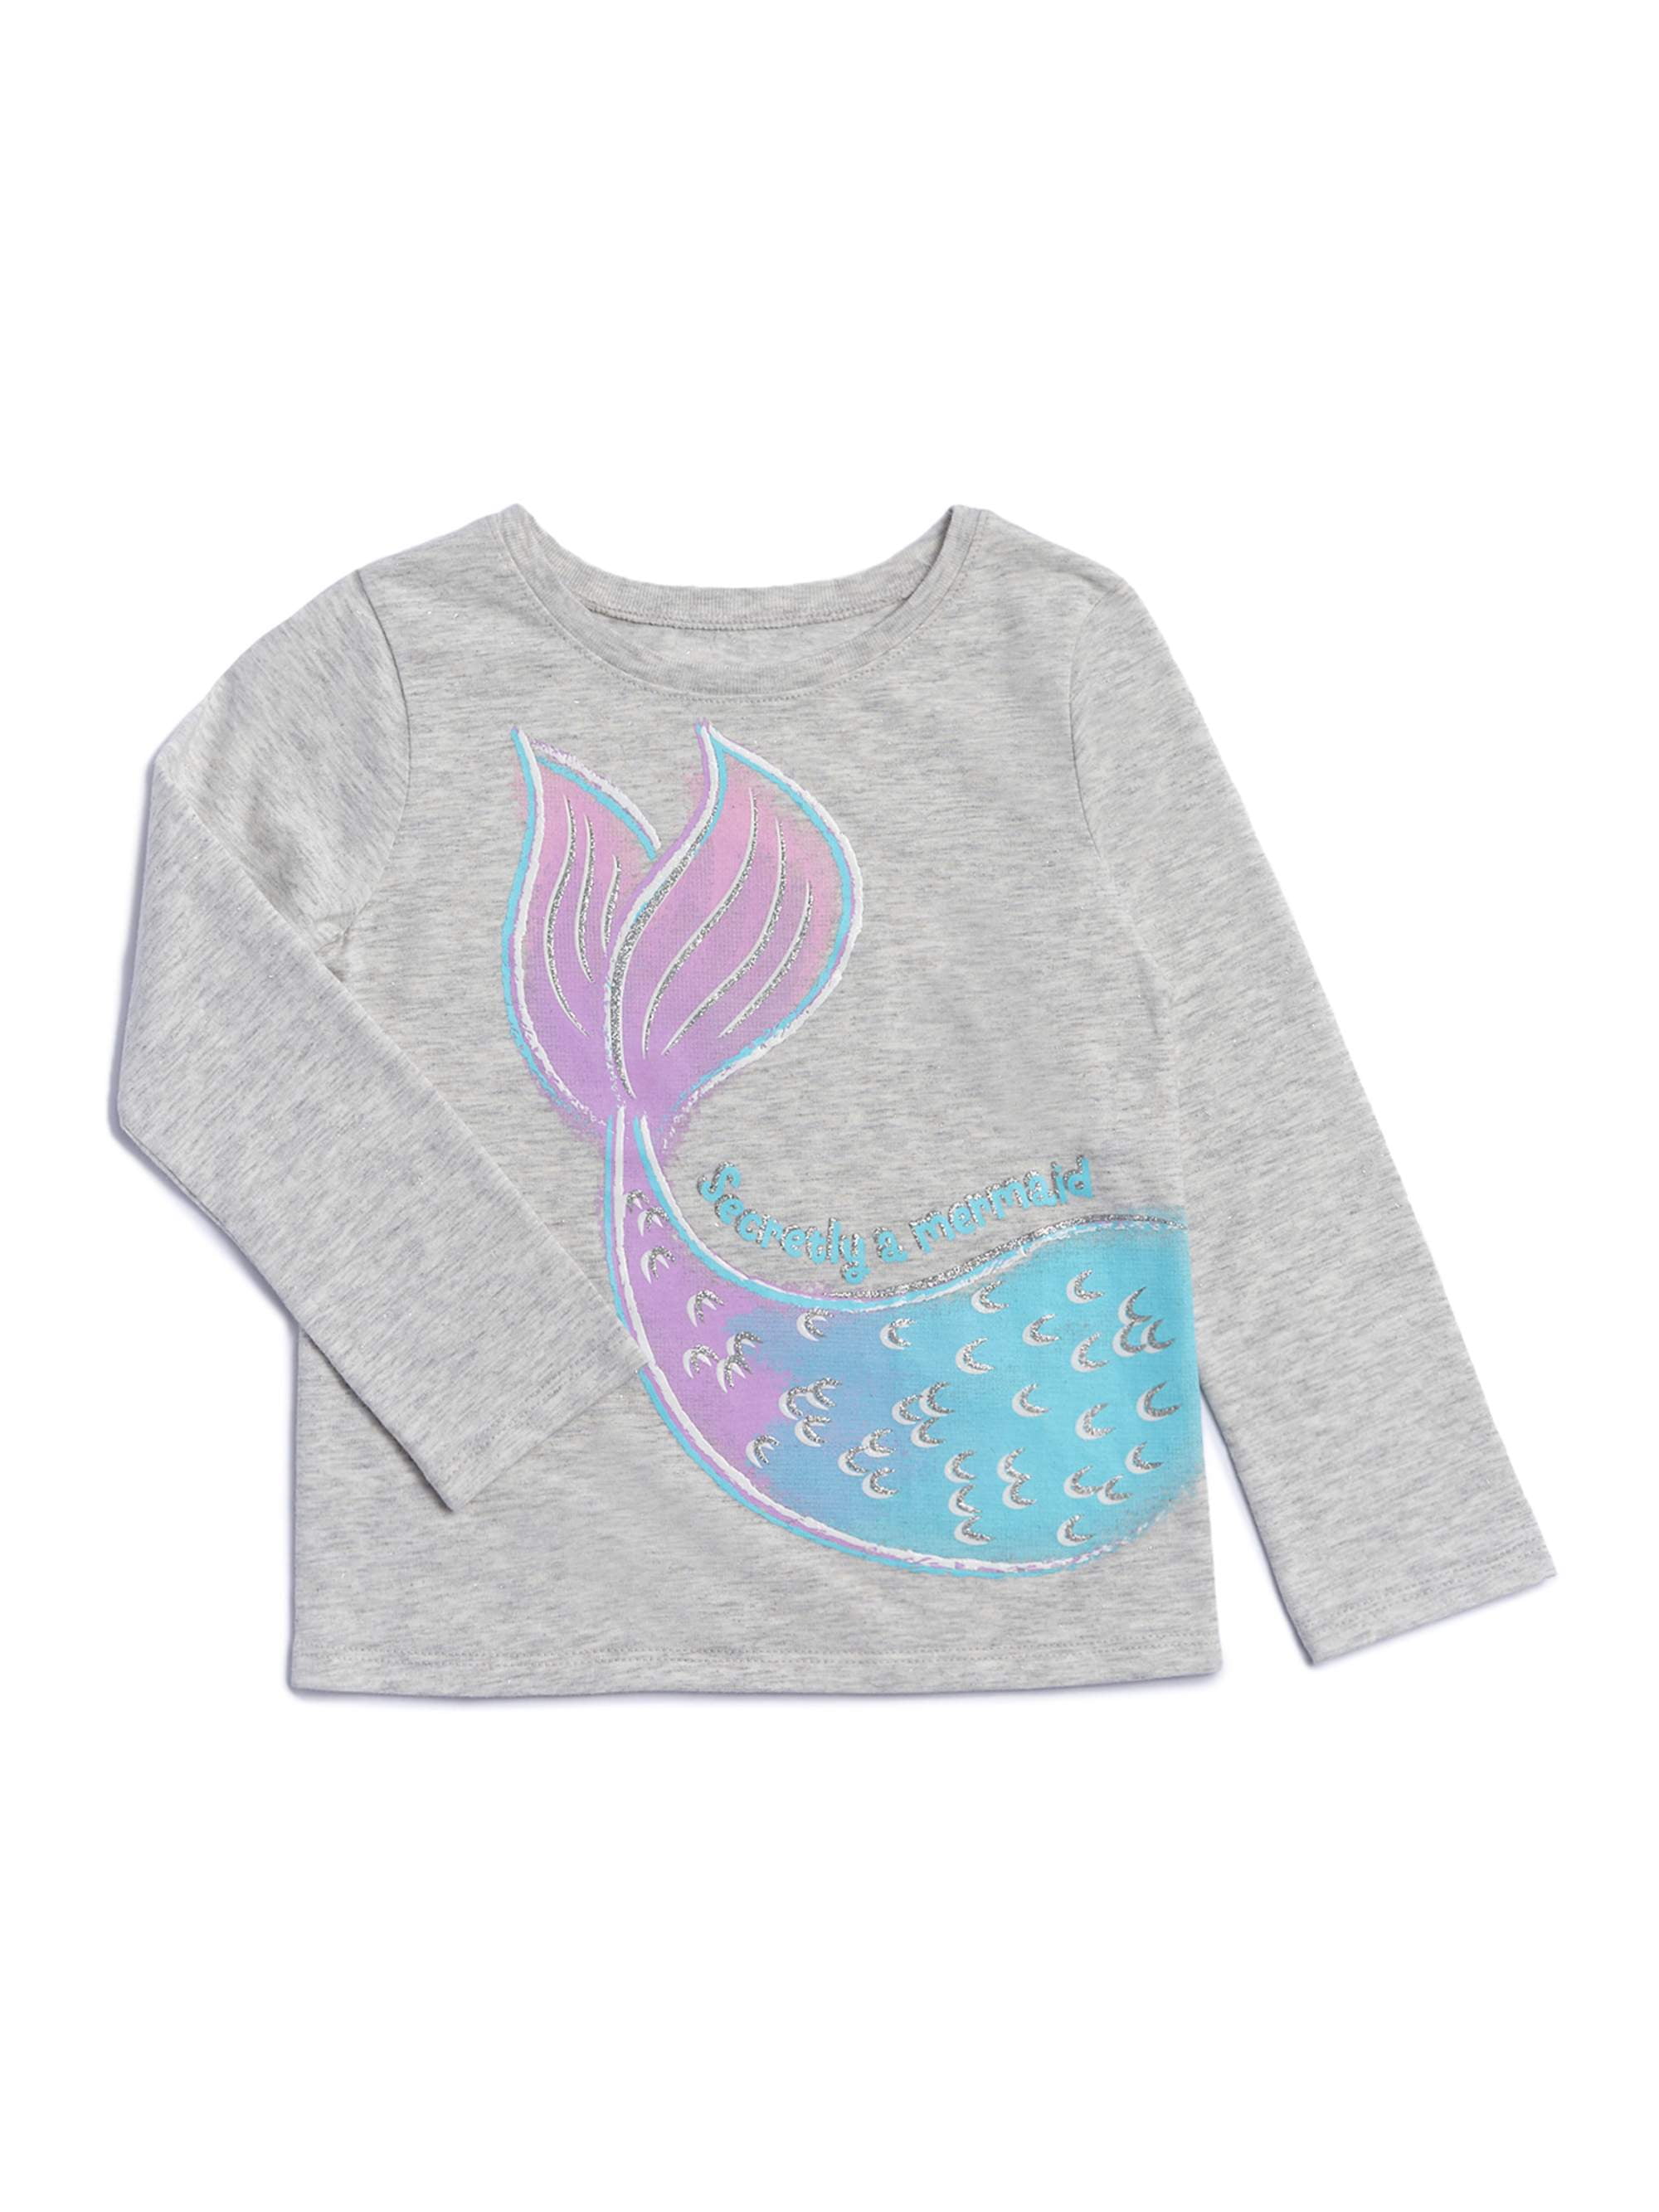 Mermaid with Purple Tail Toddler Long Sleeve T-Shirt inktastic Vacay Mode